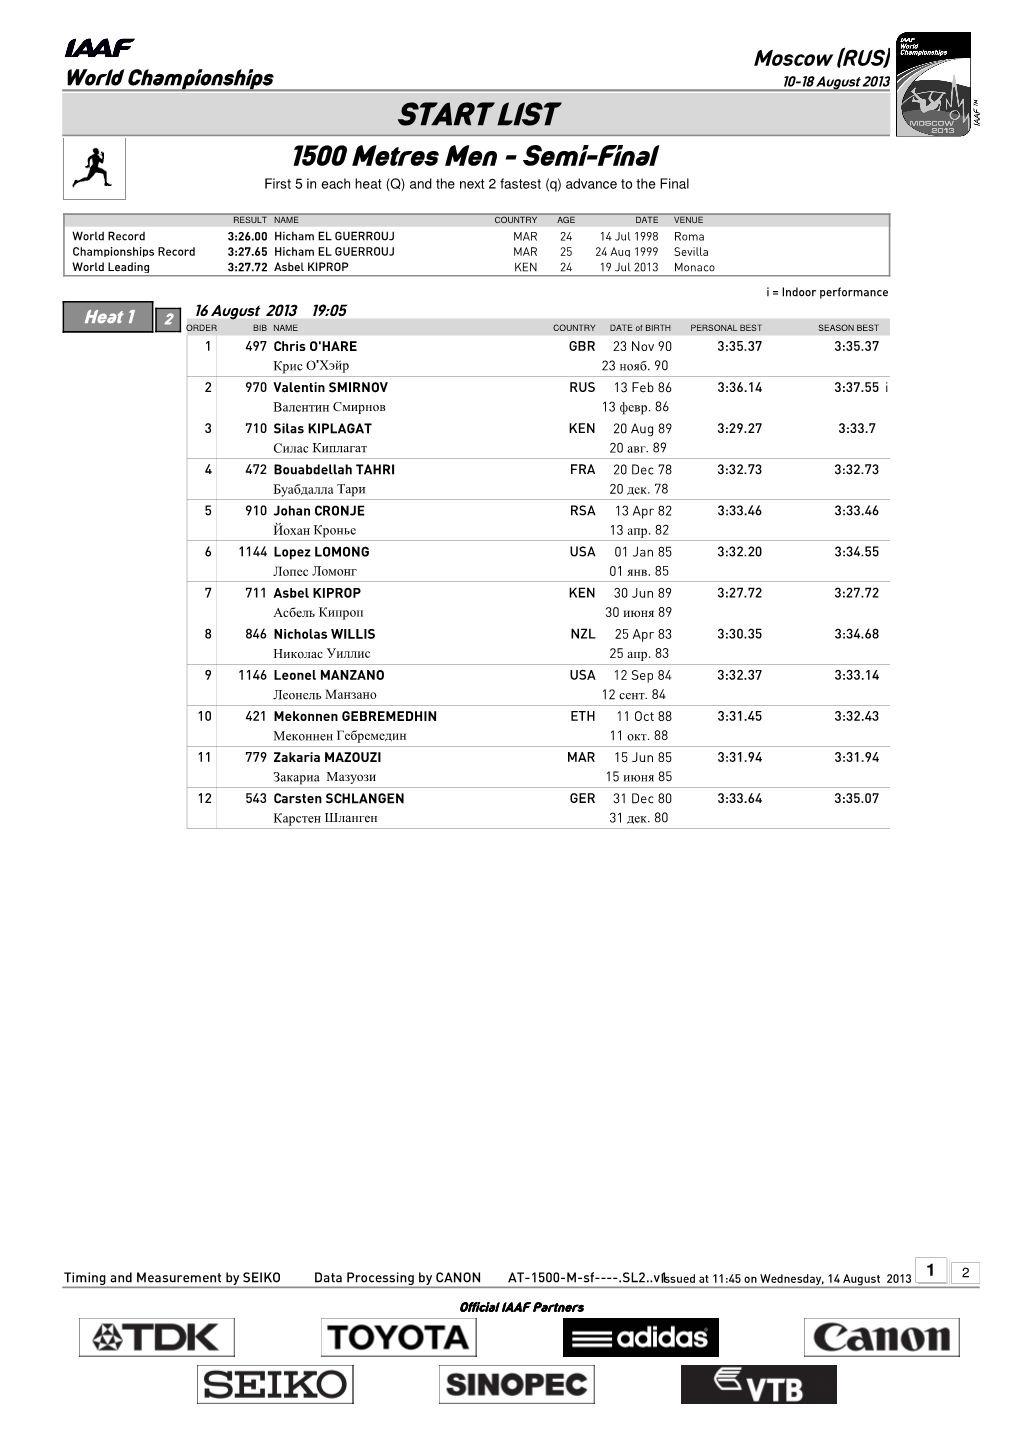 START LIST 1500 Metres Men - Semi-Final First 5 in Each Heat (Q) and the Next 2 Fastest (Q) Advance to the Final